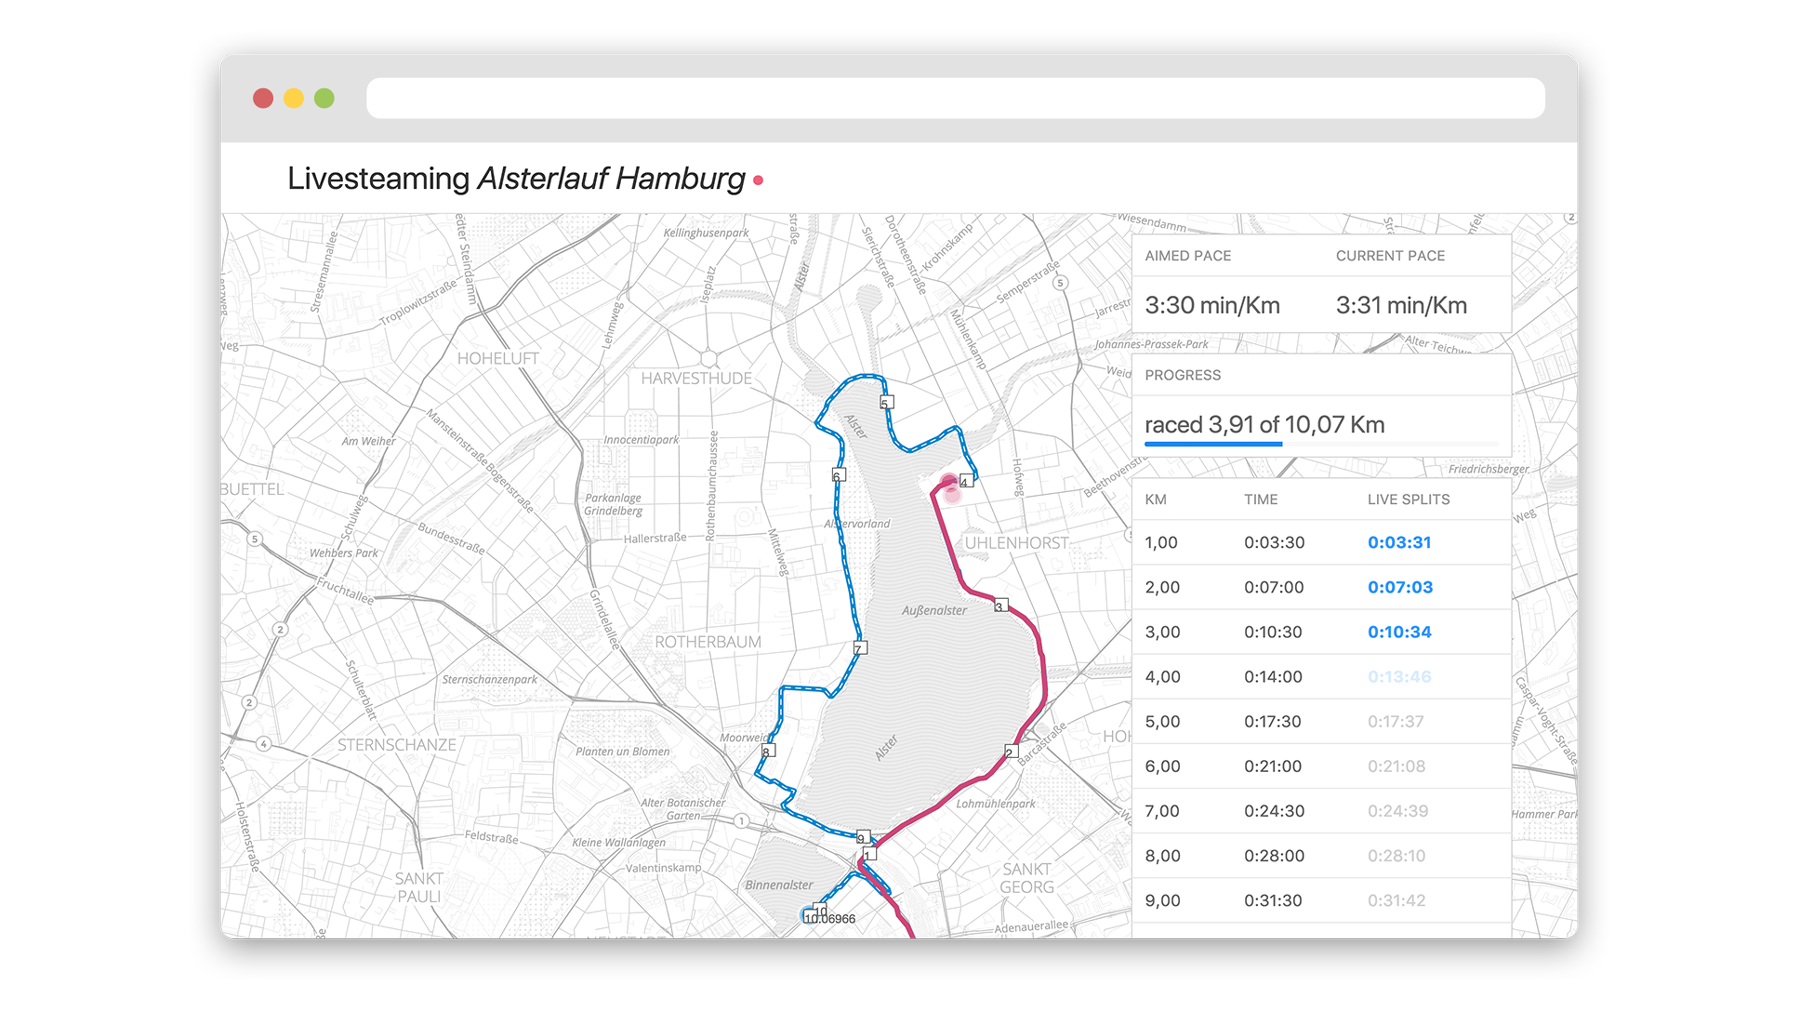 Screenshot of a conceptual web application for tracking running events. It shows a map with the running course and the position of the runner. Also it has a sidebar with a lot of running metrics like splits and pace information.